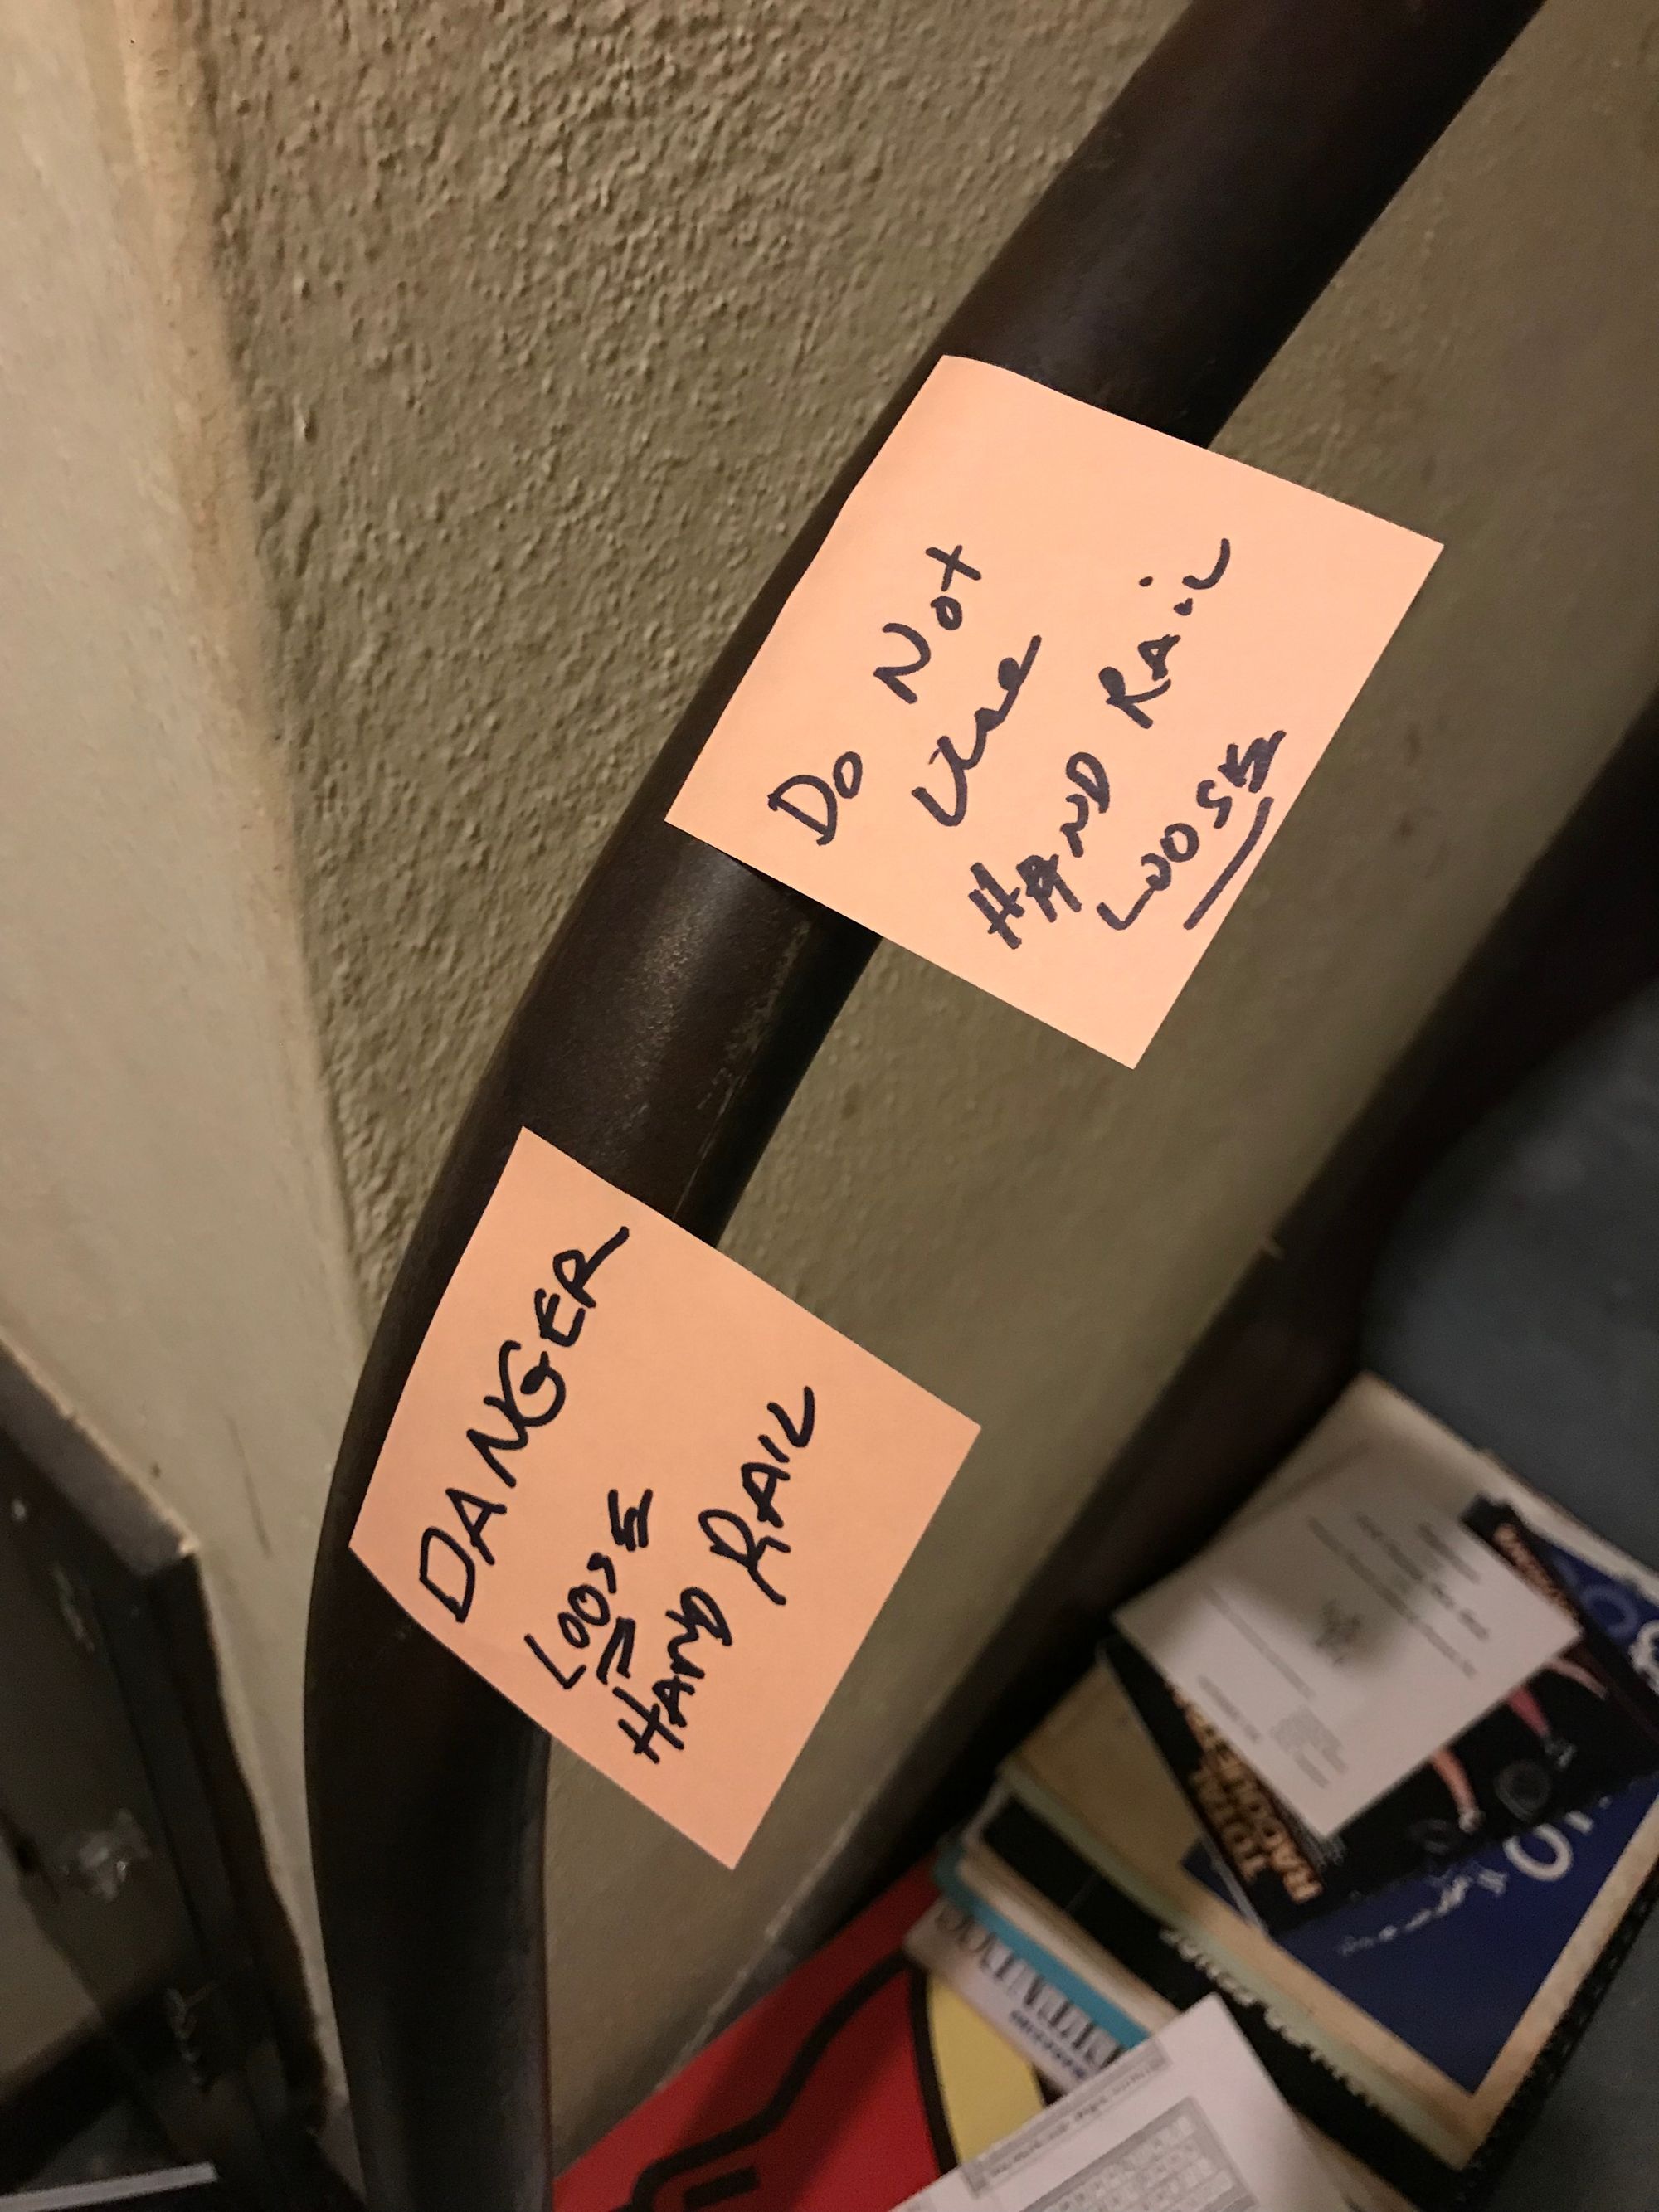 A handrail with sticky notes on it reading "DANGER: Loose Hand Rail" and "Do not use, hand rail loose."